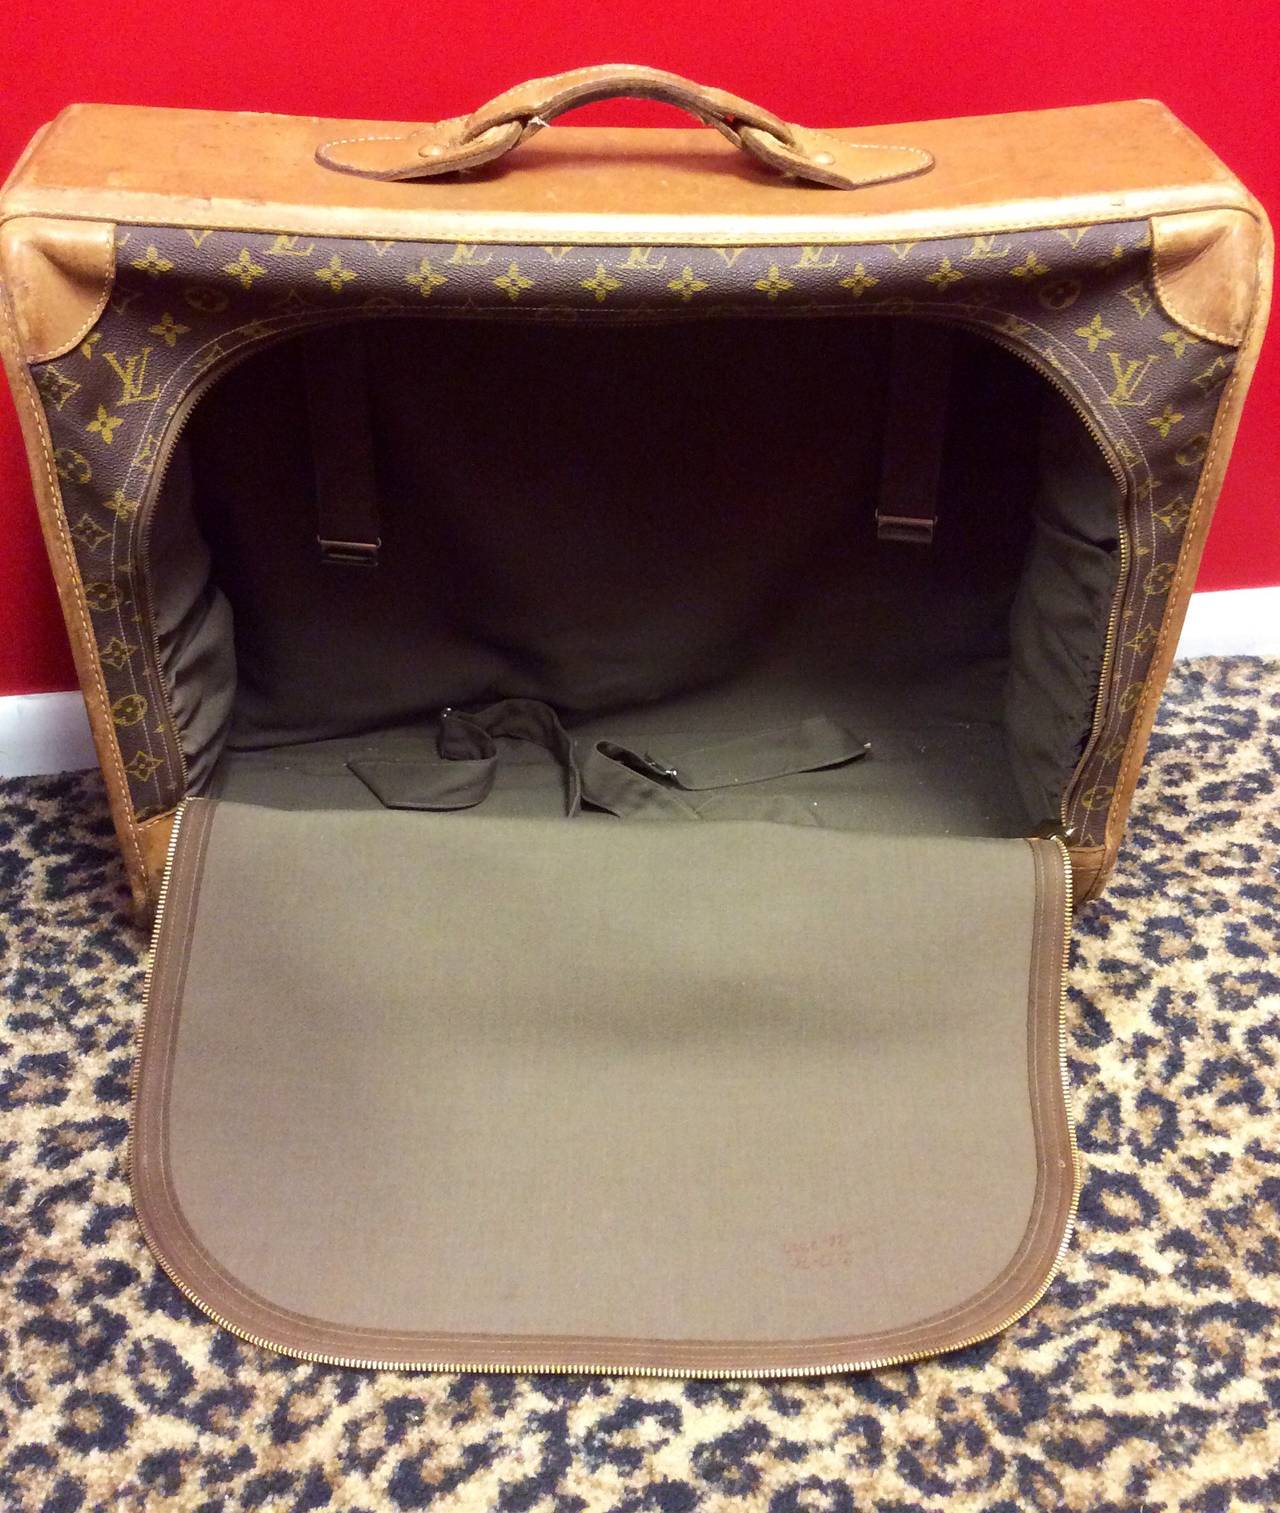 Vintage Louis Vuitton French Company Monogram Luggage Suitcase For Sale 5